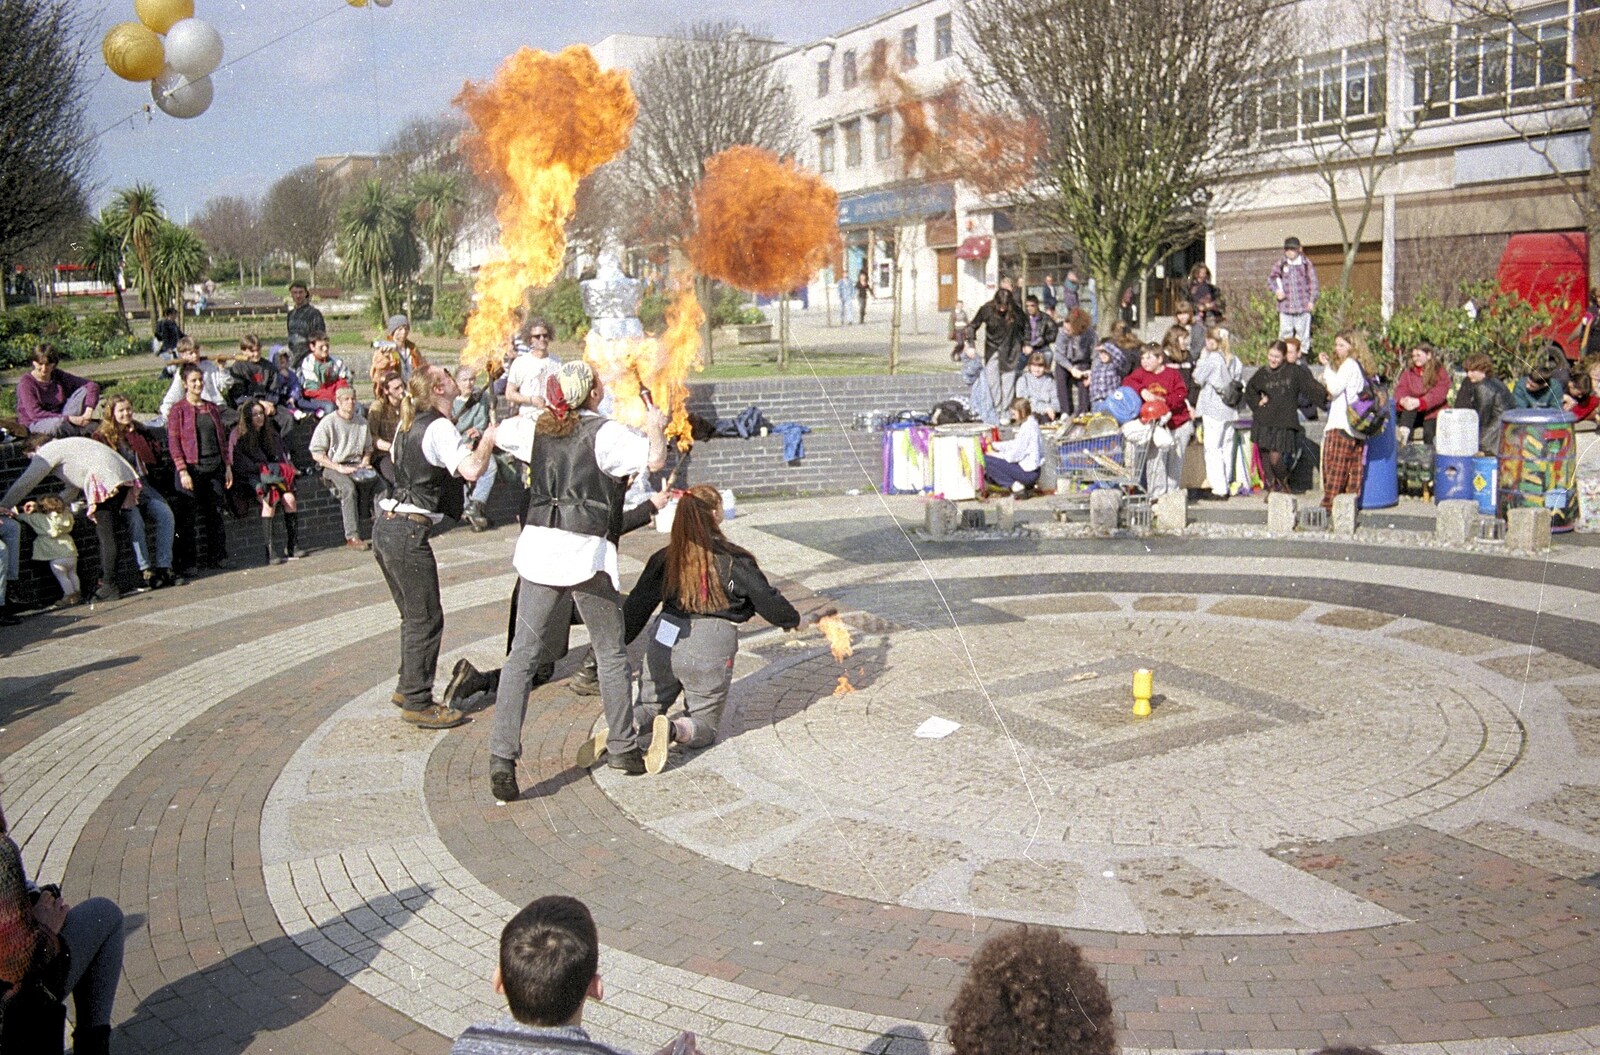 More fire-eating on Armada Way from Uni: A CISU Trip To Plymouth, Devon - 16th March 1996